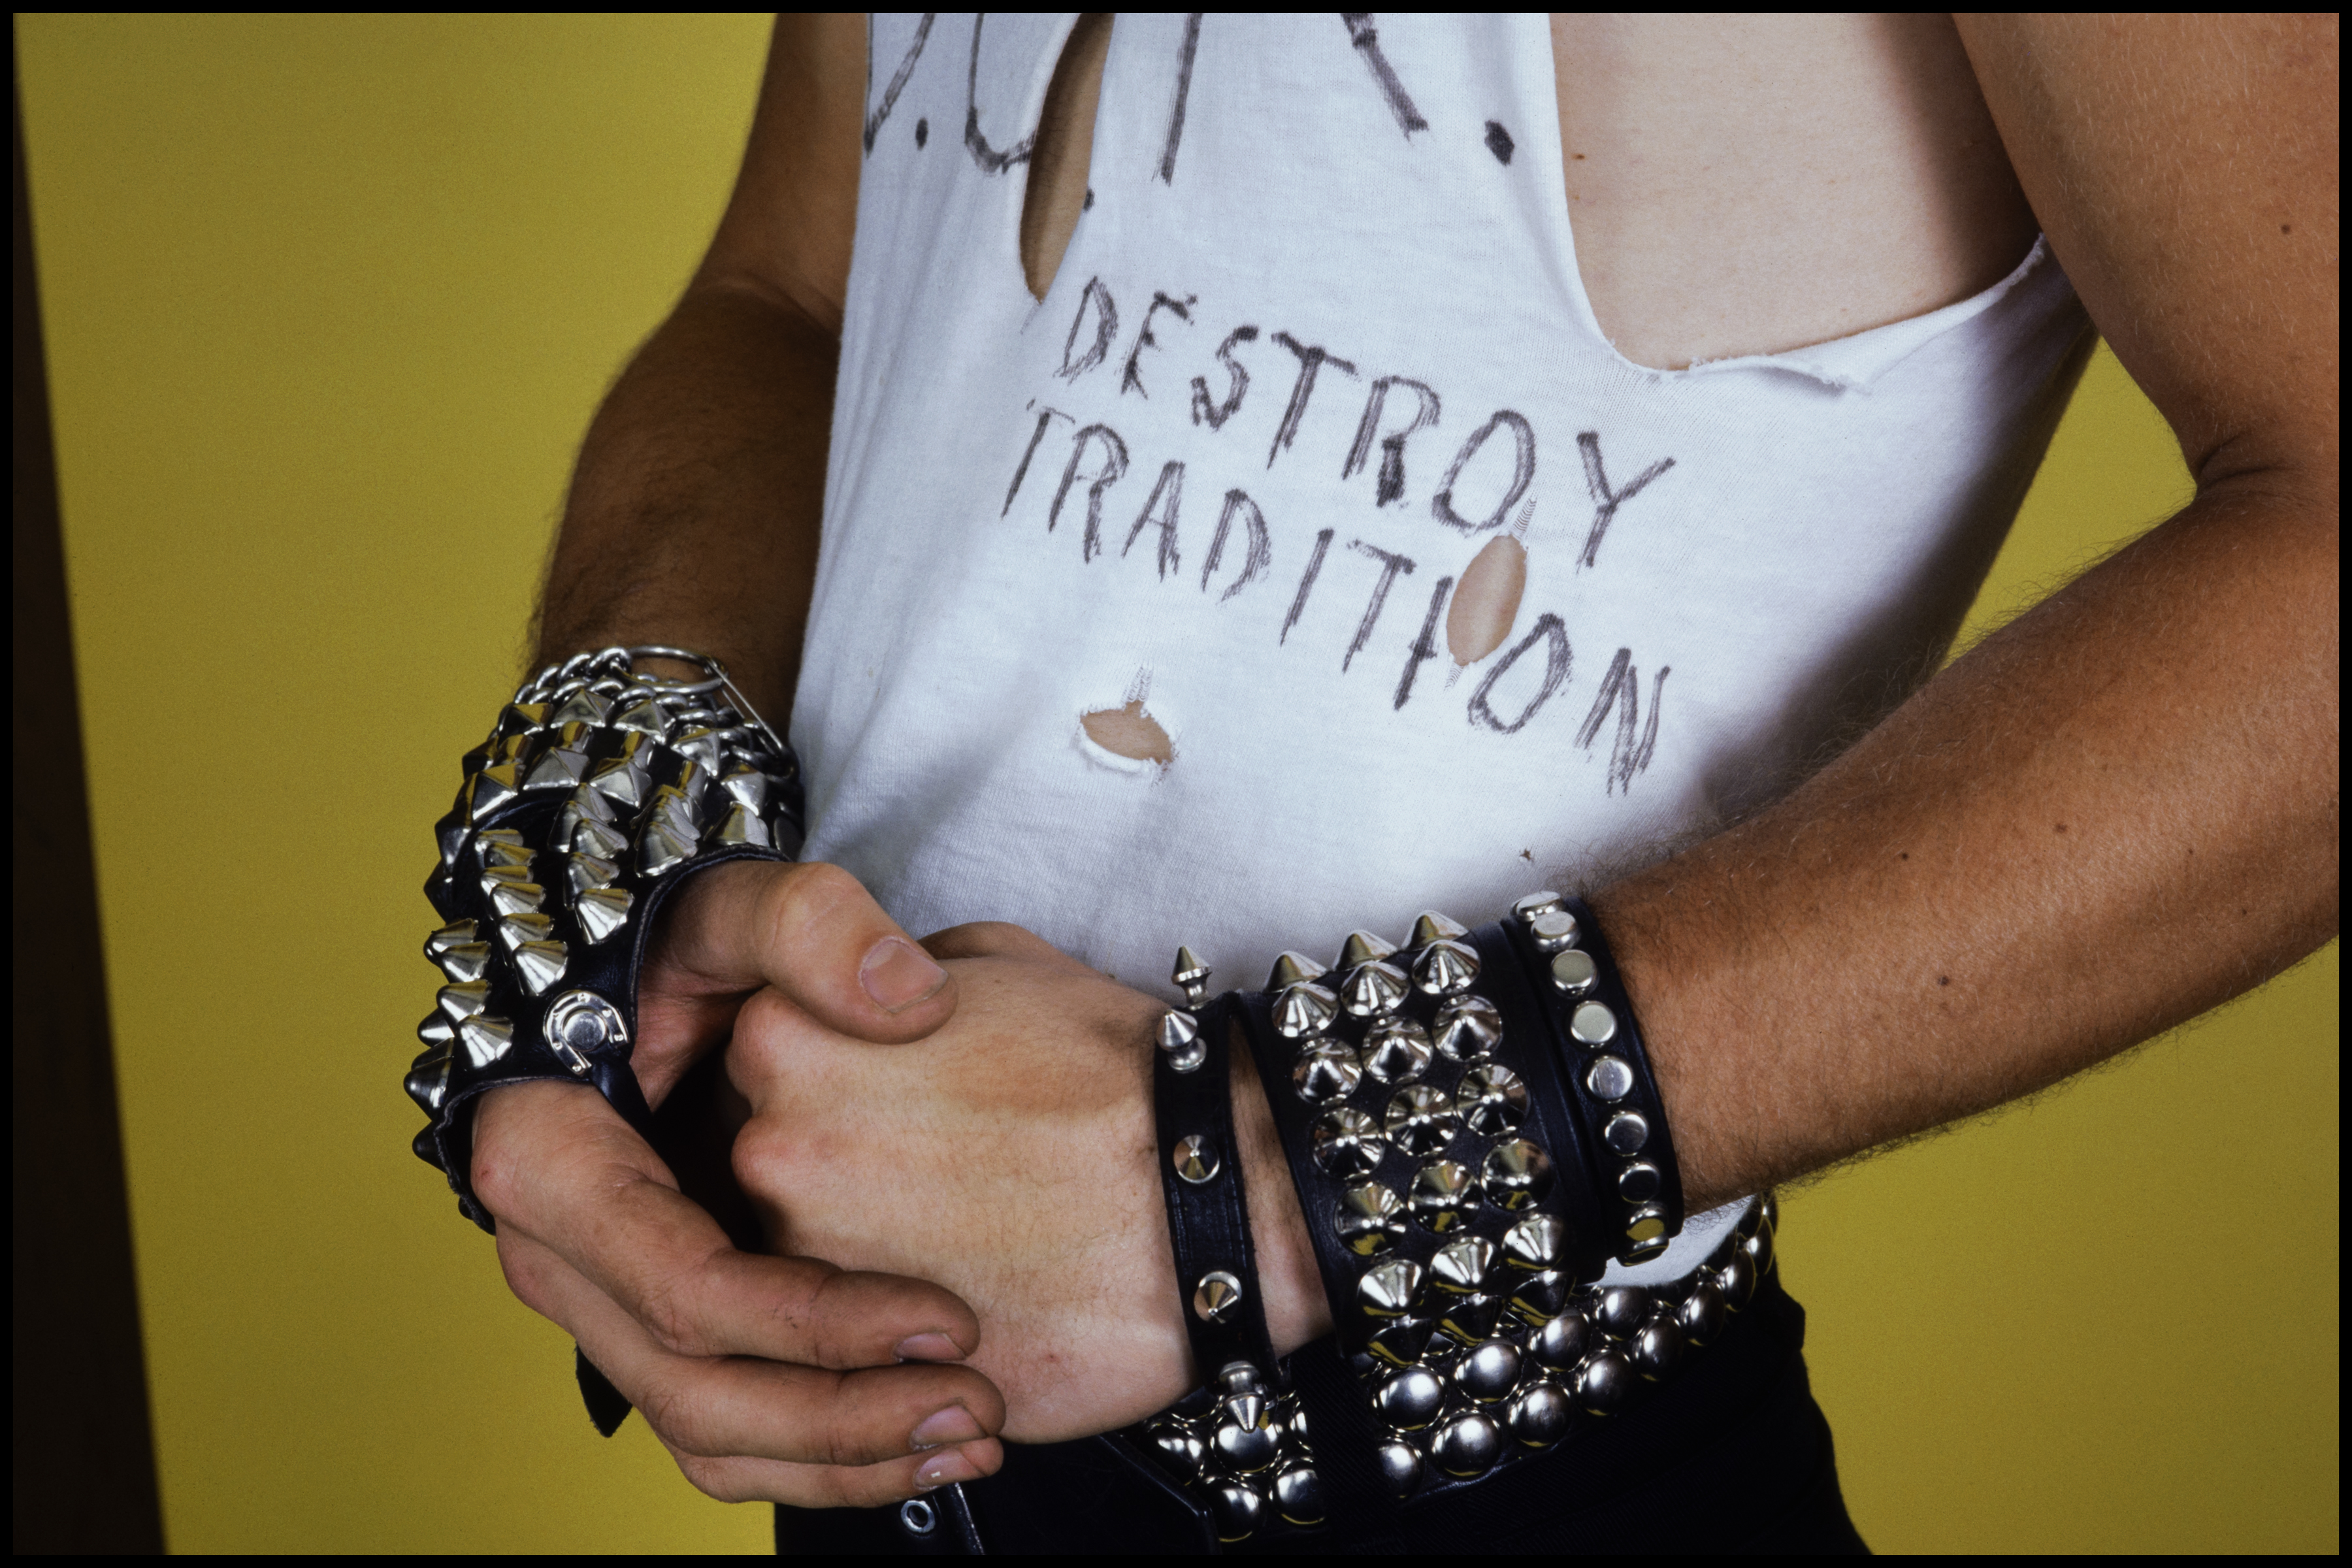 Student with studded wristbands and a torn t-shirt that features the text 'Destroy Tradition' in magic marker.